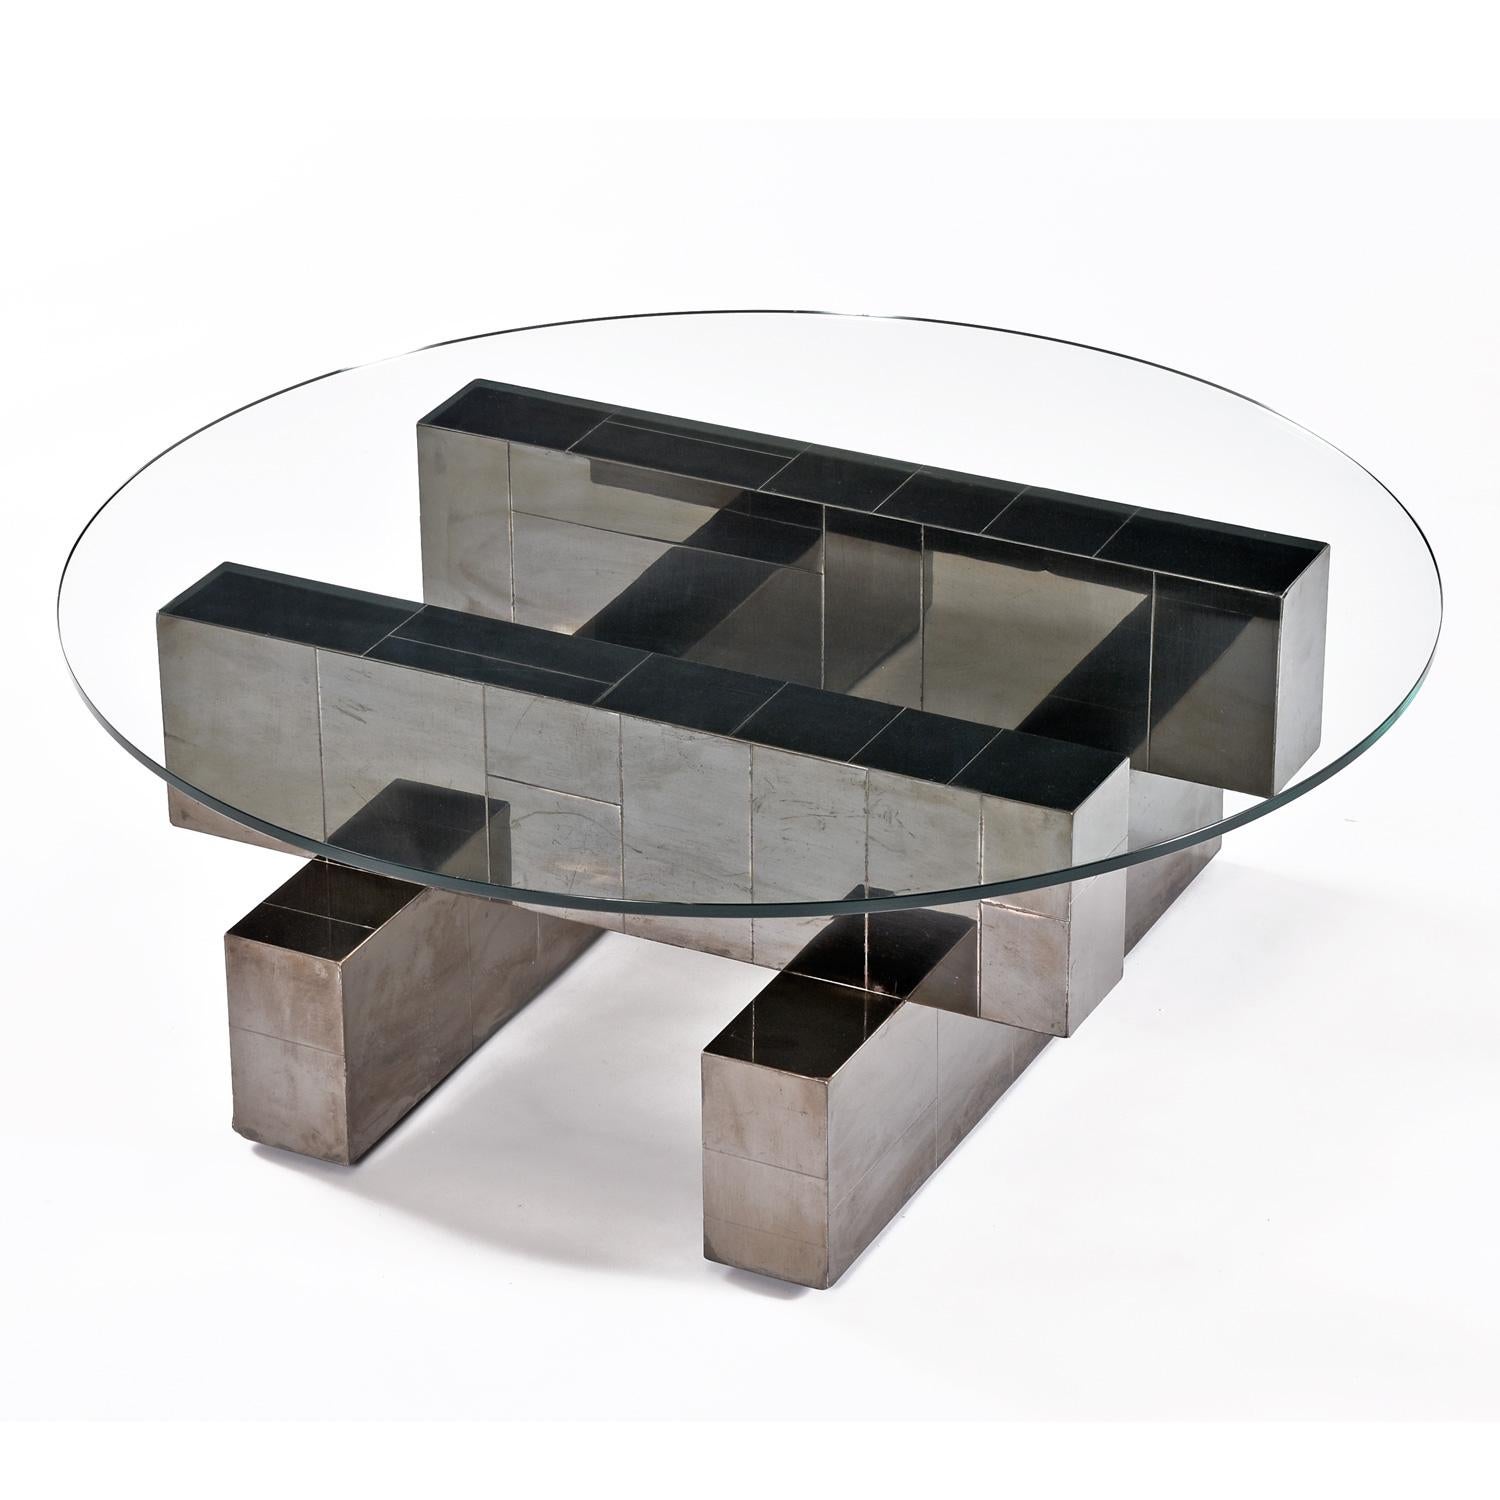 Paul Evans was an American born furniture designer, sculptor, and artist, who is famous for his contributions to American furniture design and the American Craft Movement of the 1970s. We are pleased to present Evan's Cityscape coffee table in